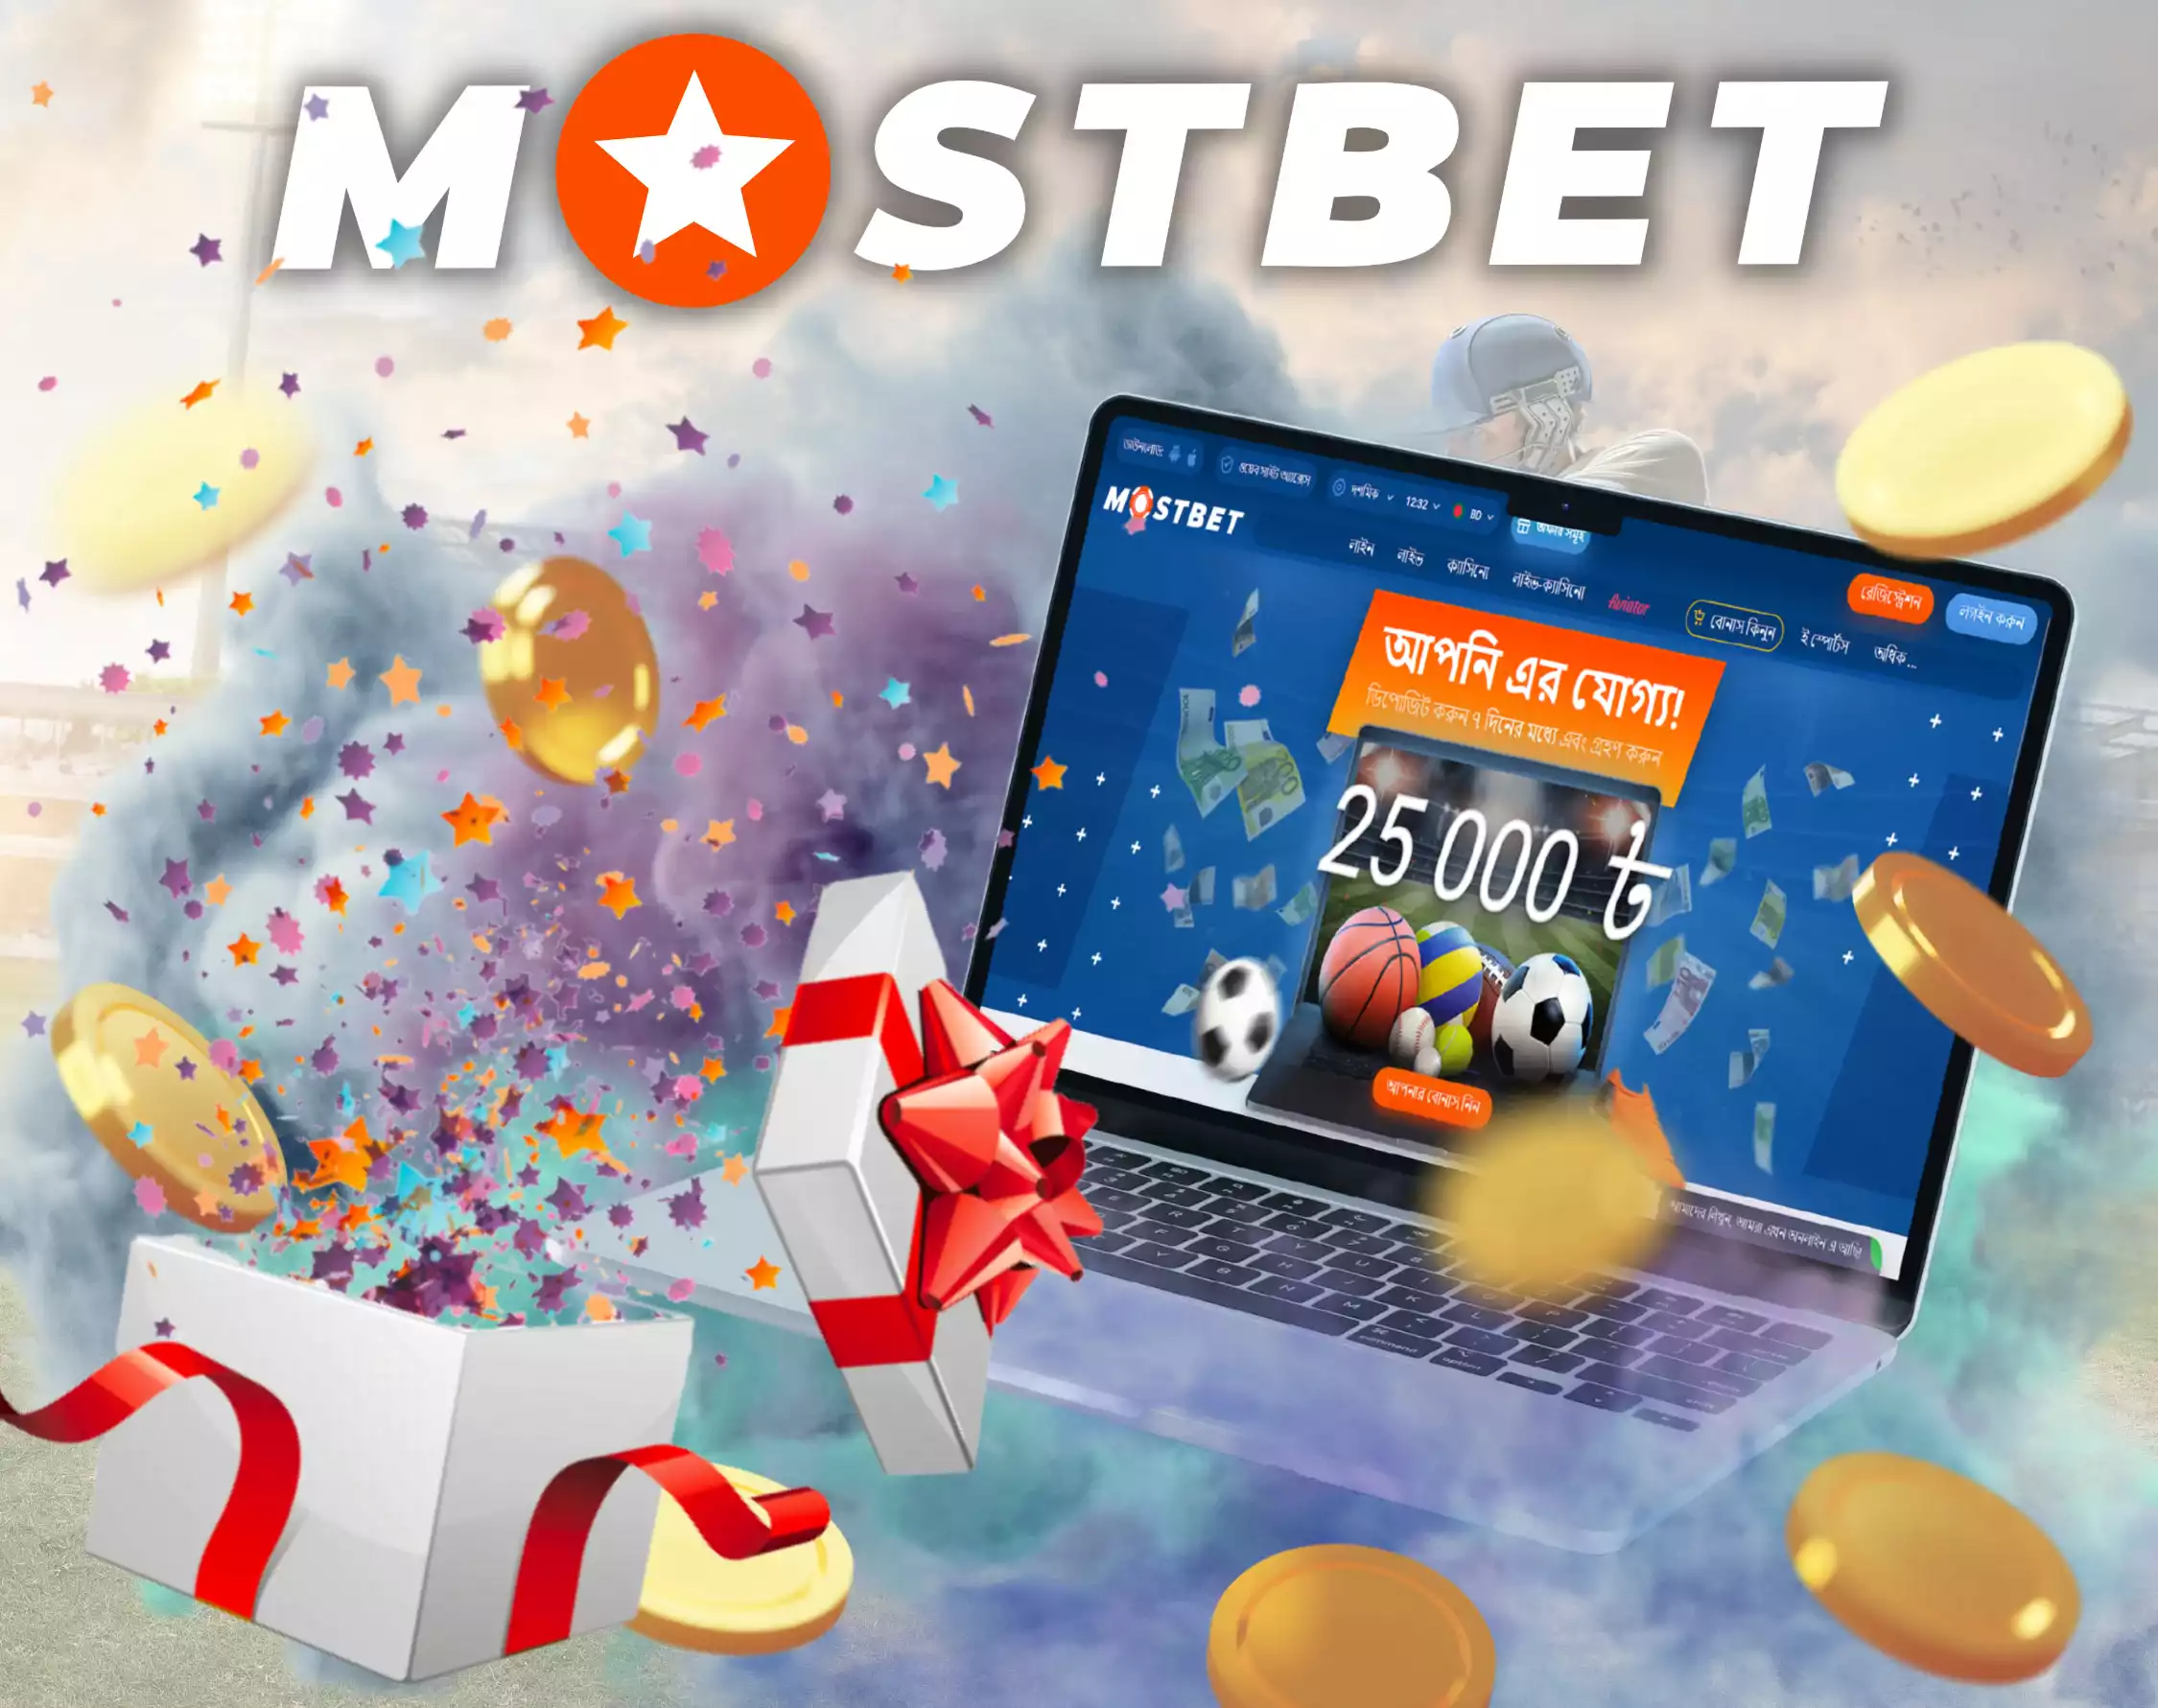 Mostbet Bookmaker and Casino Online in Turkey Promotion 101